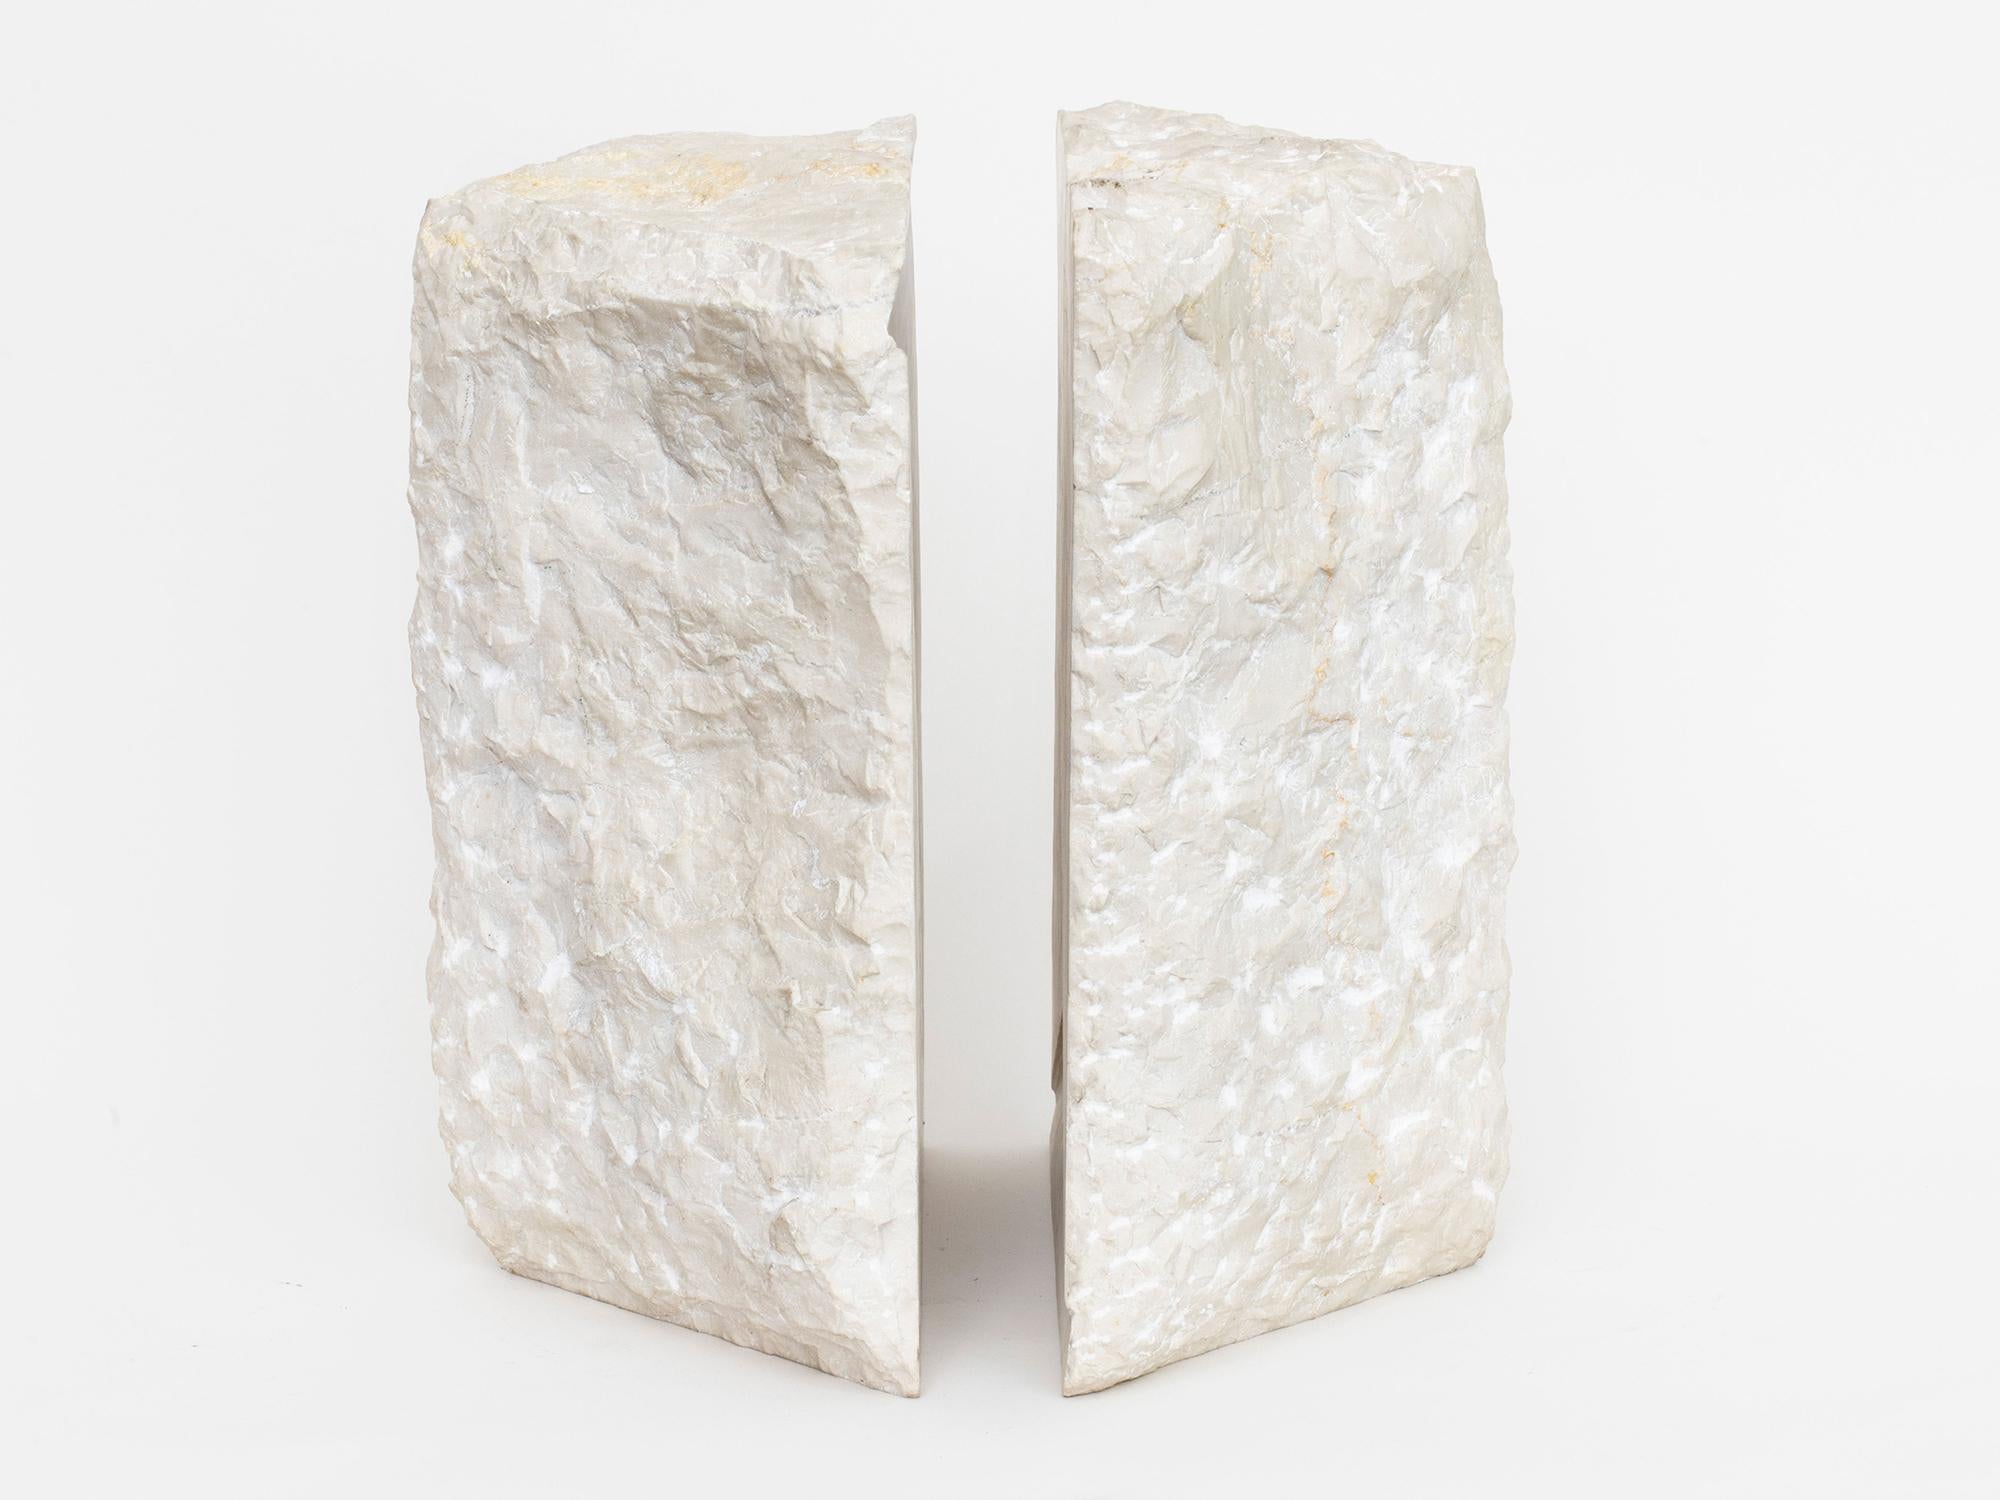 Marble sculpture by Israeli-American artist Hanna Eshel (b. 1926). Hand carved in Carrara, Italy. Eshel is a multi-disciplinary artist best known for her work in carved marble, a skill she honed from 1972-1978 while living and practicing in Carrara,